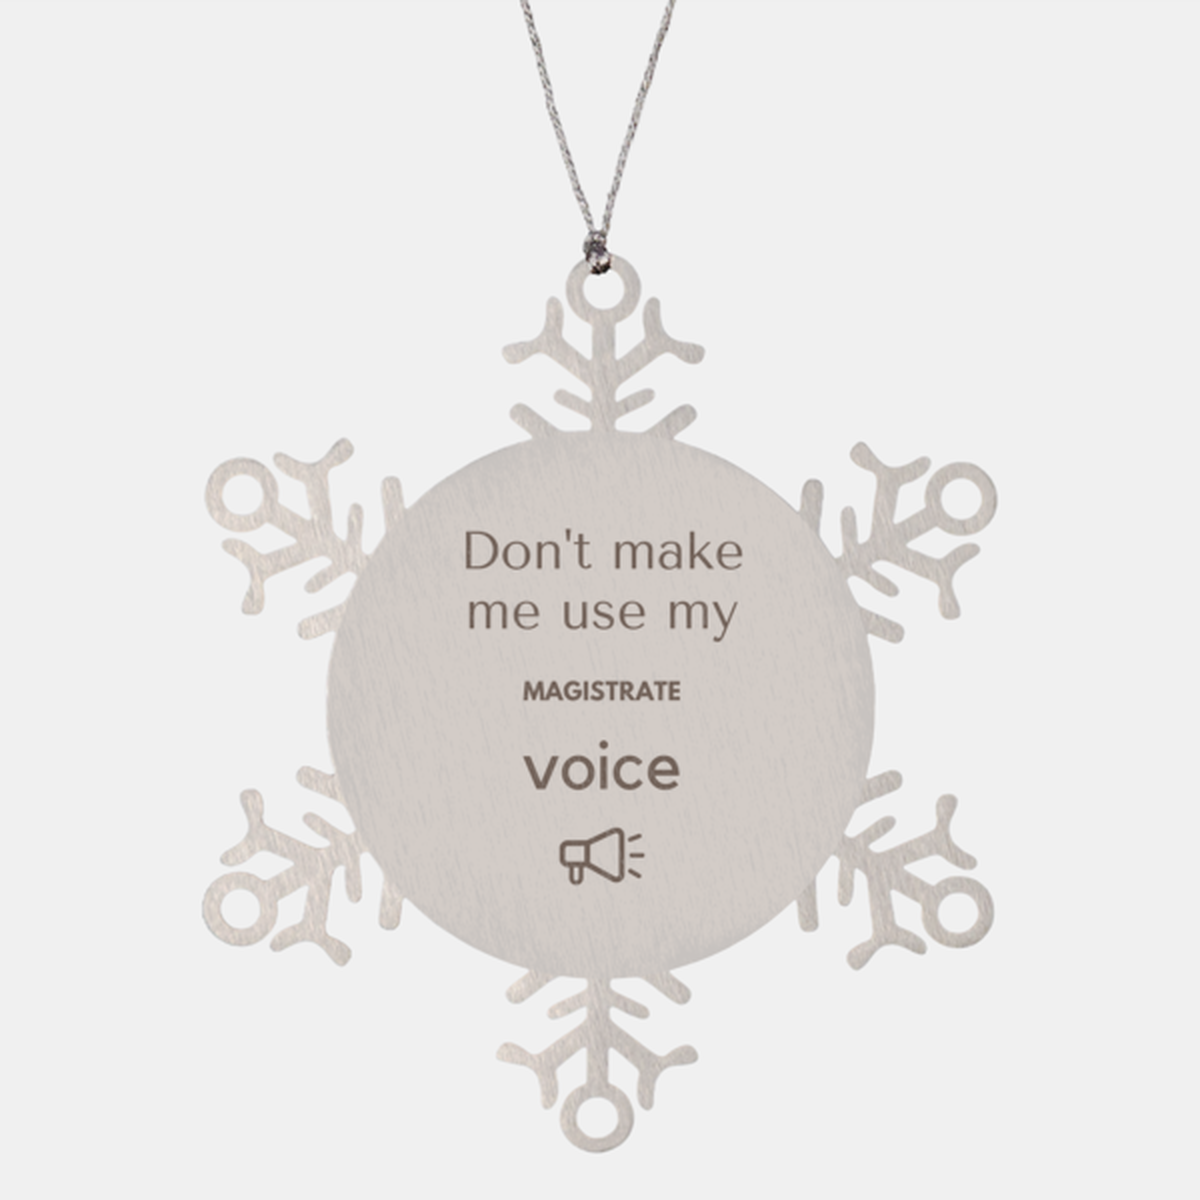 Don't make me use my Magistrate voice, Sarcasm Magistrate Ornament Gifts, Christmas Magistrate Snowflake Ornament Unique Gifts For Magistrate Coworkers, Men, Women, Colleague, Friends